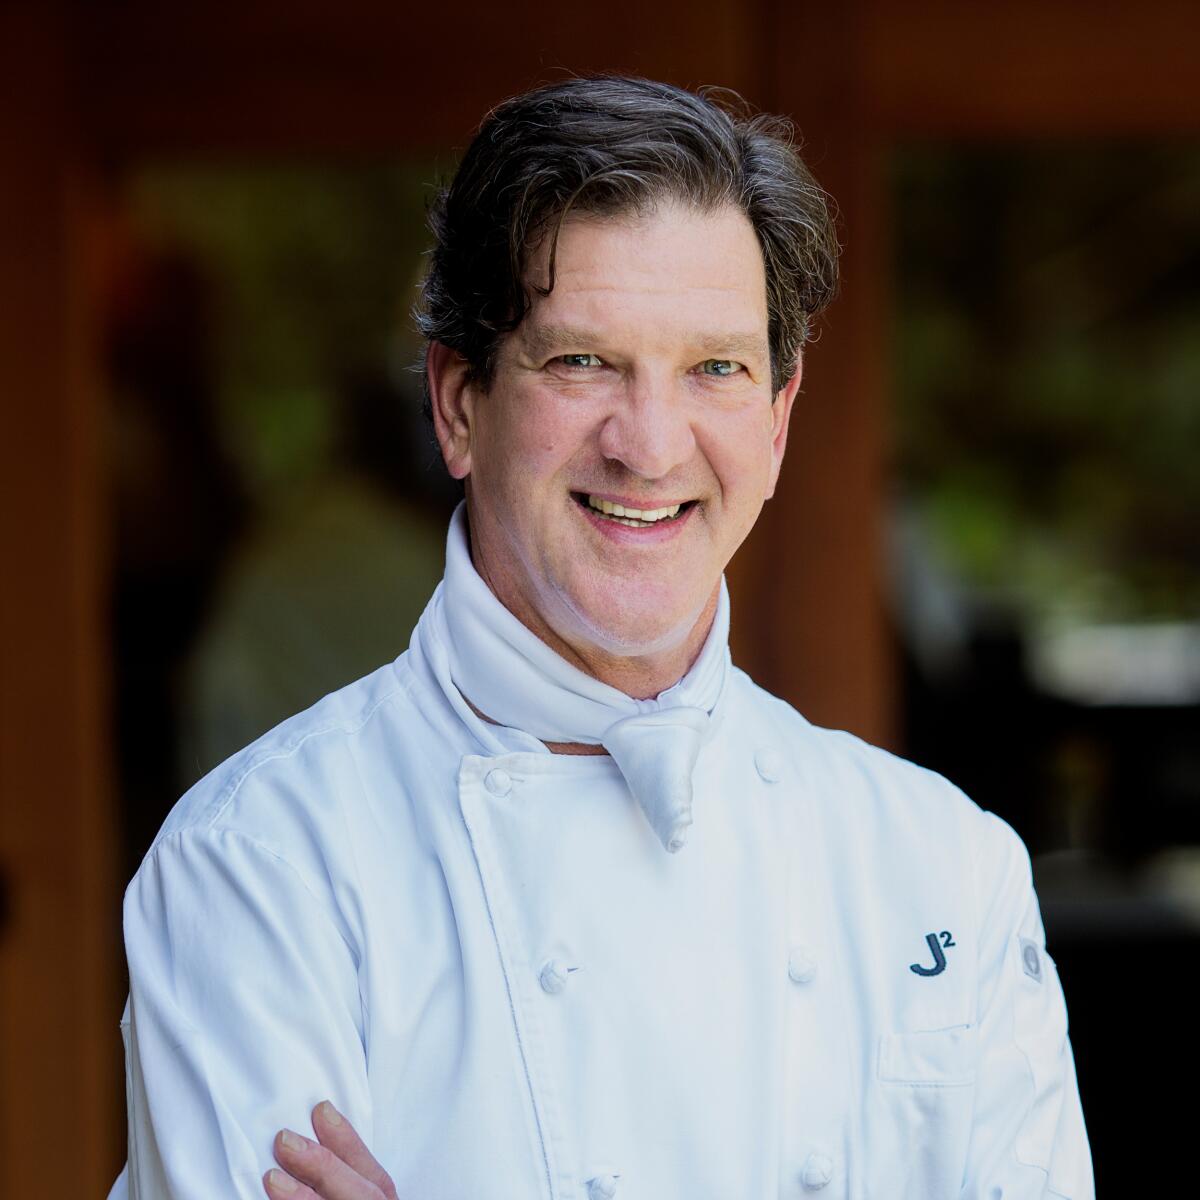 Chef Jeff Jackson has moved into a new corporate role after 20 years as executive chef at The Lodge at Torrey Pines.